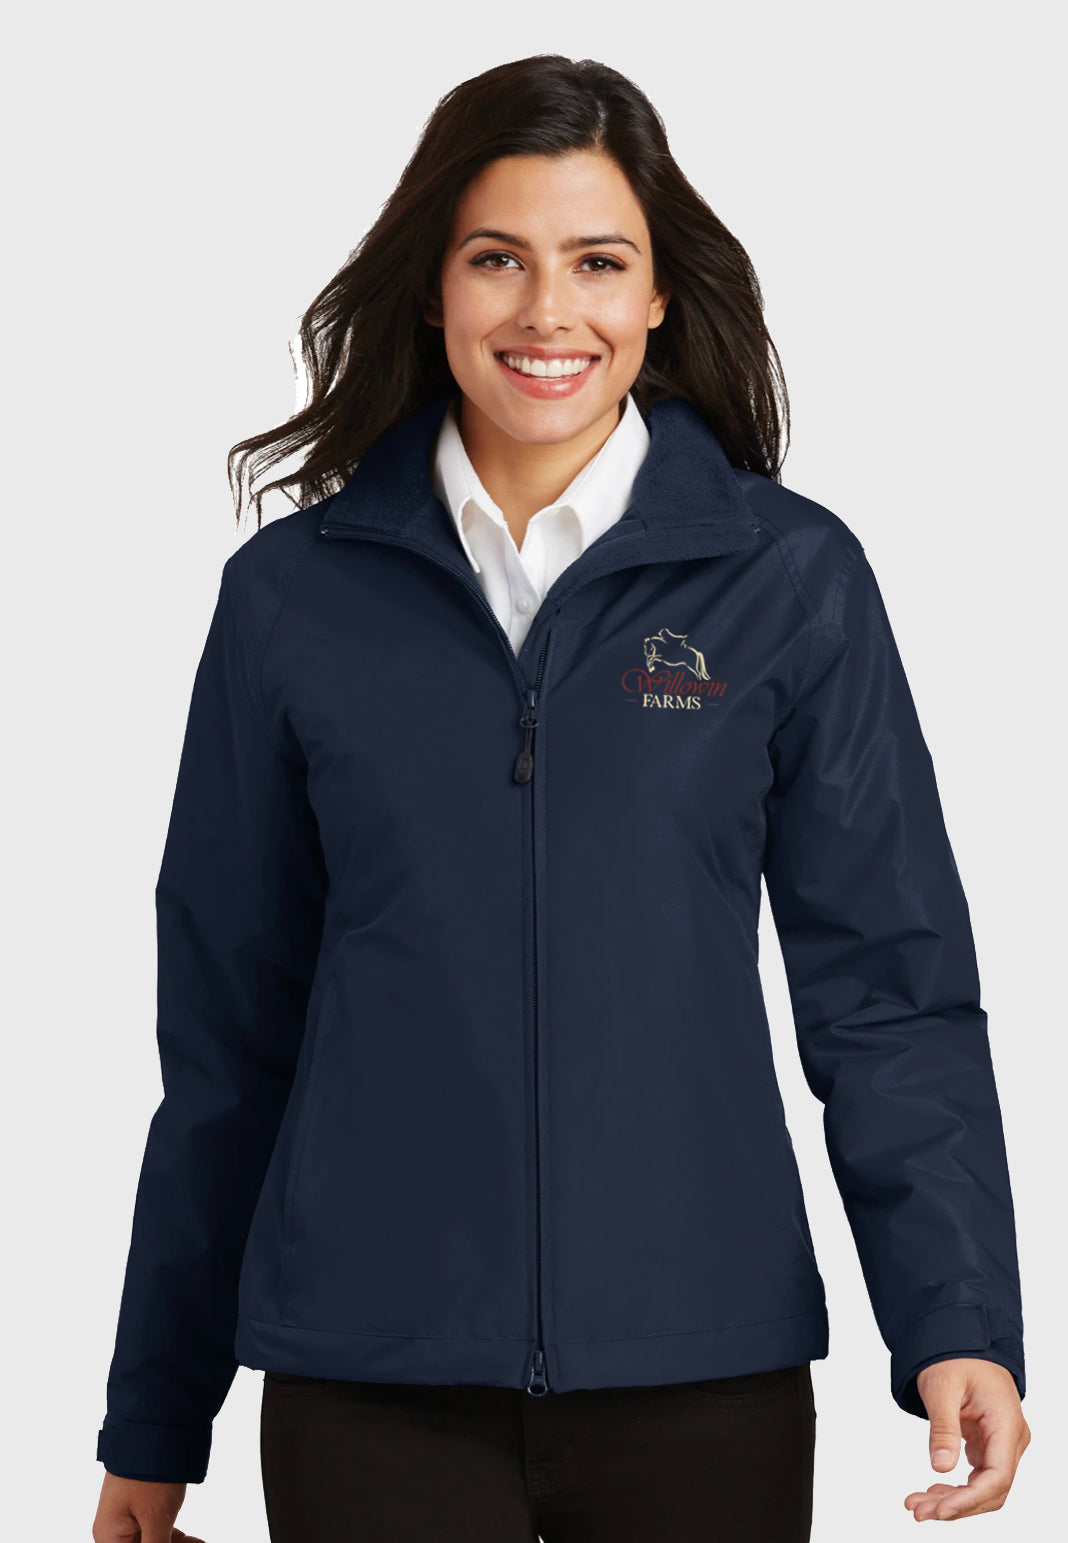 Willowin Farms Ladies + Mens Port Authority® Challenger Jackets - Navy